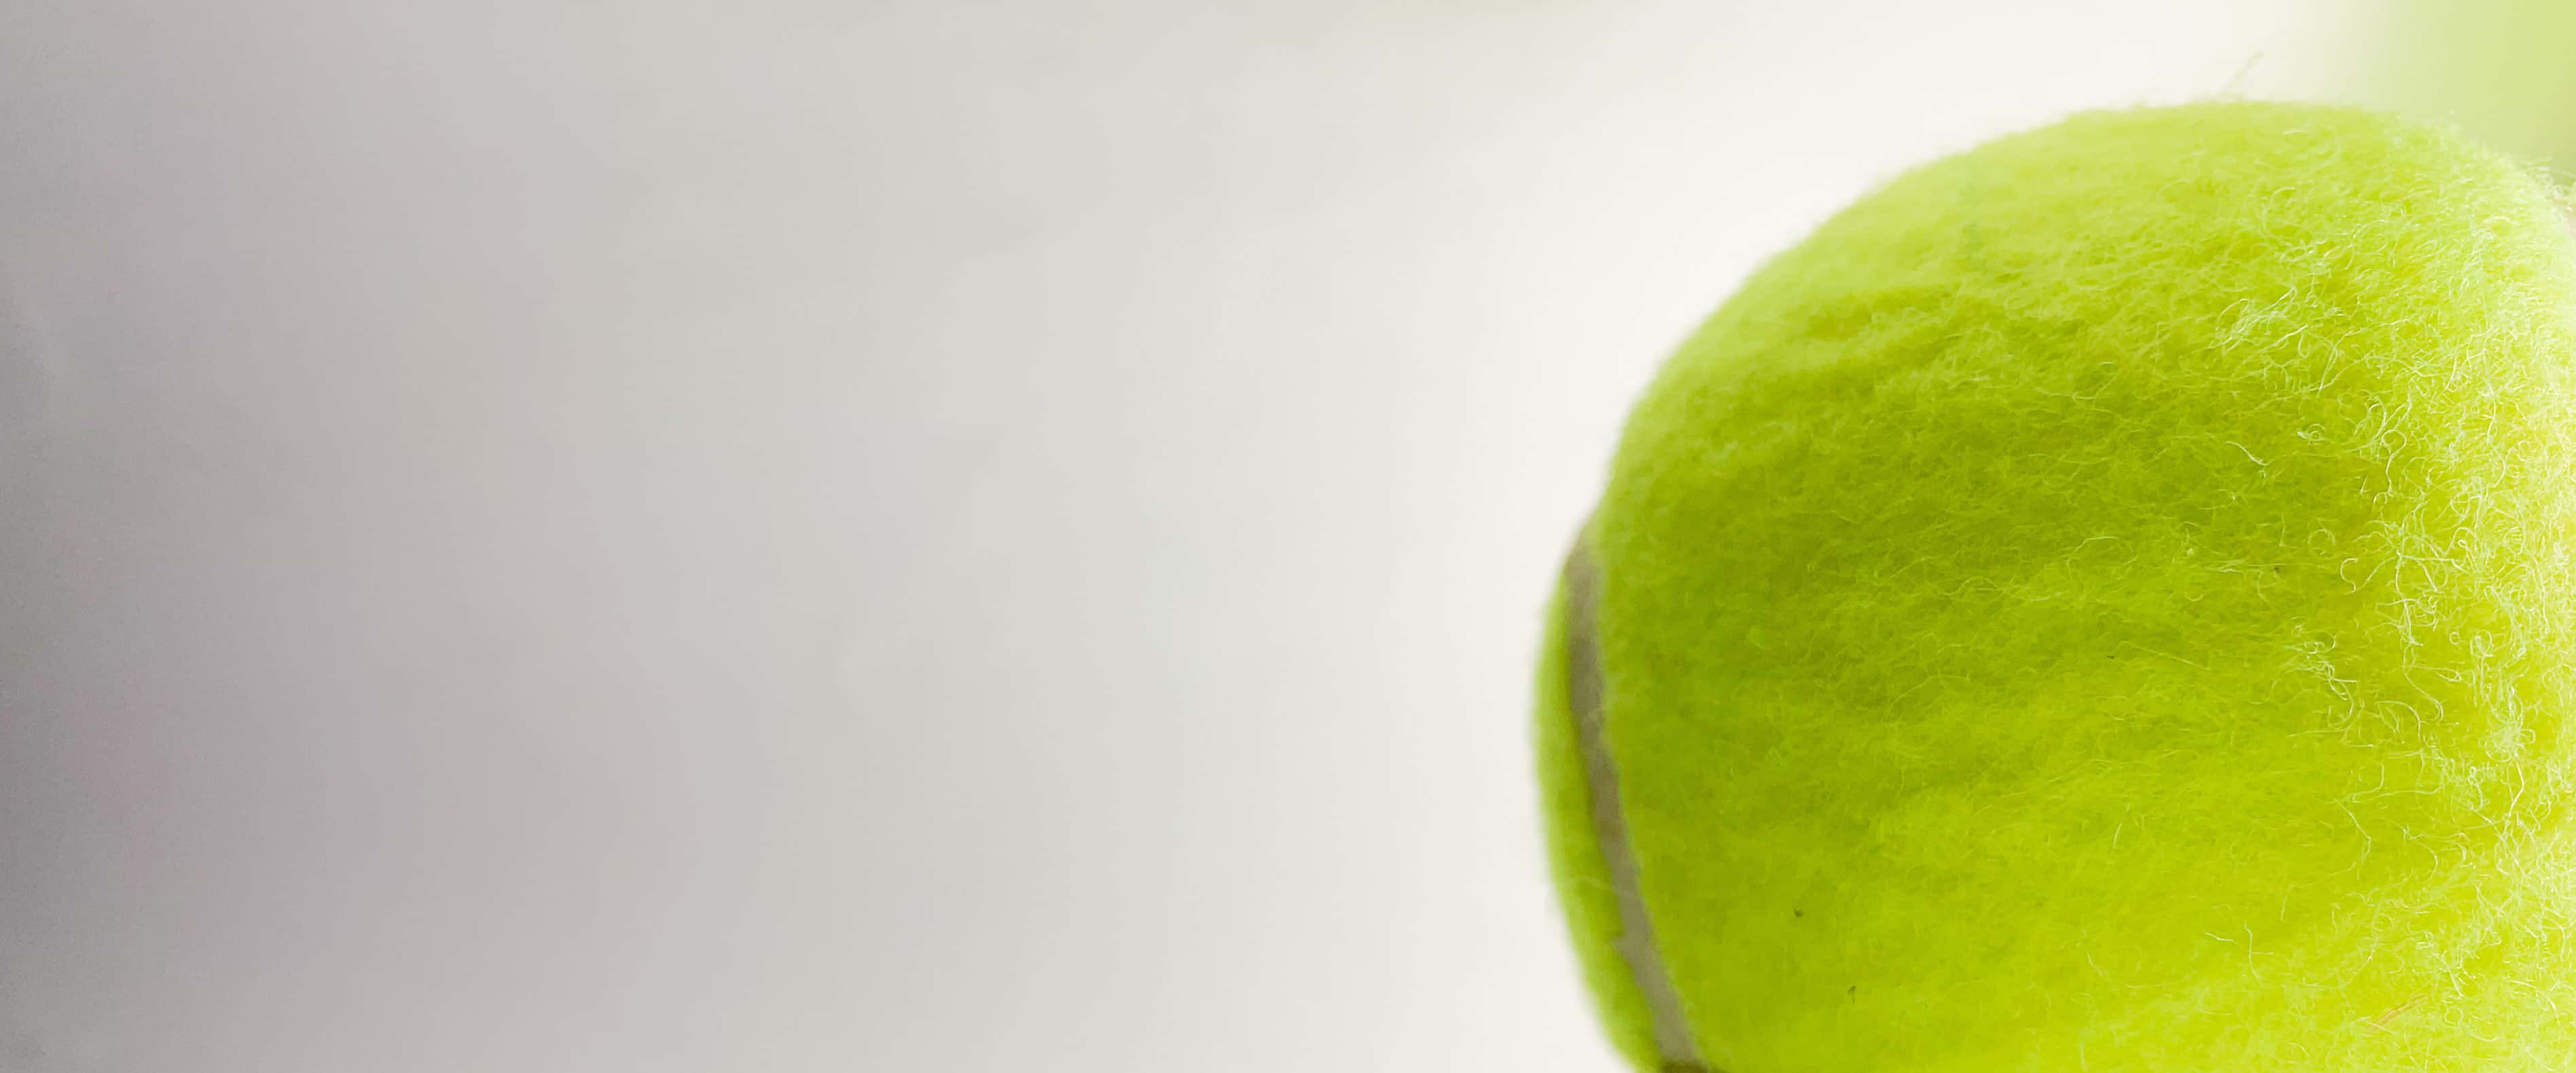 A tennis ball bleeding off the ride side of the header image.